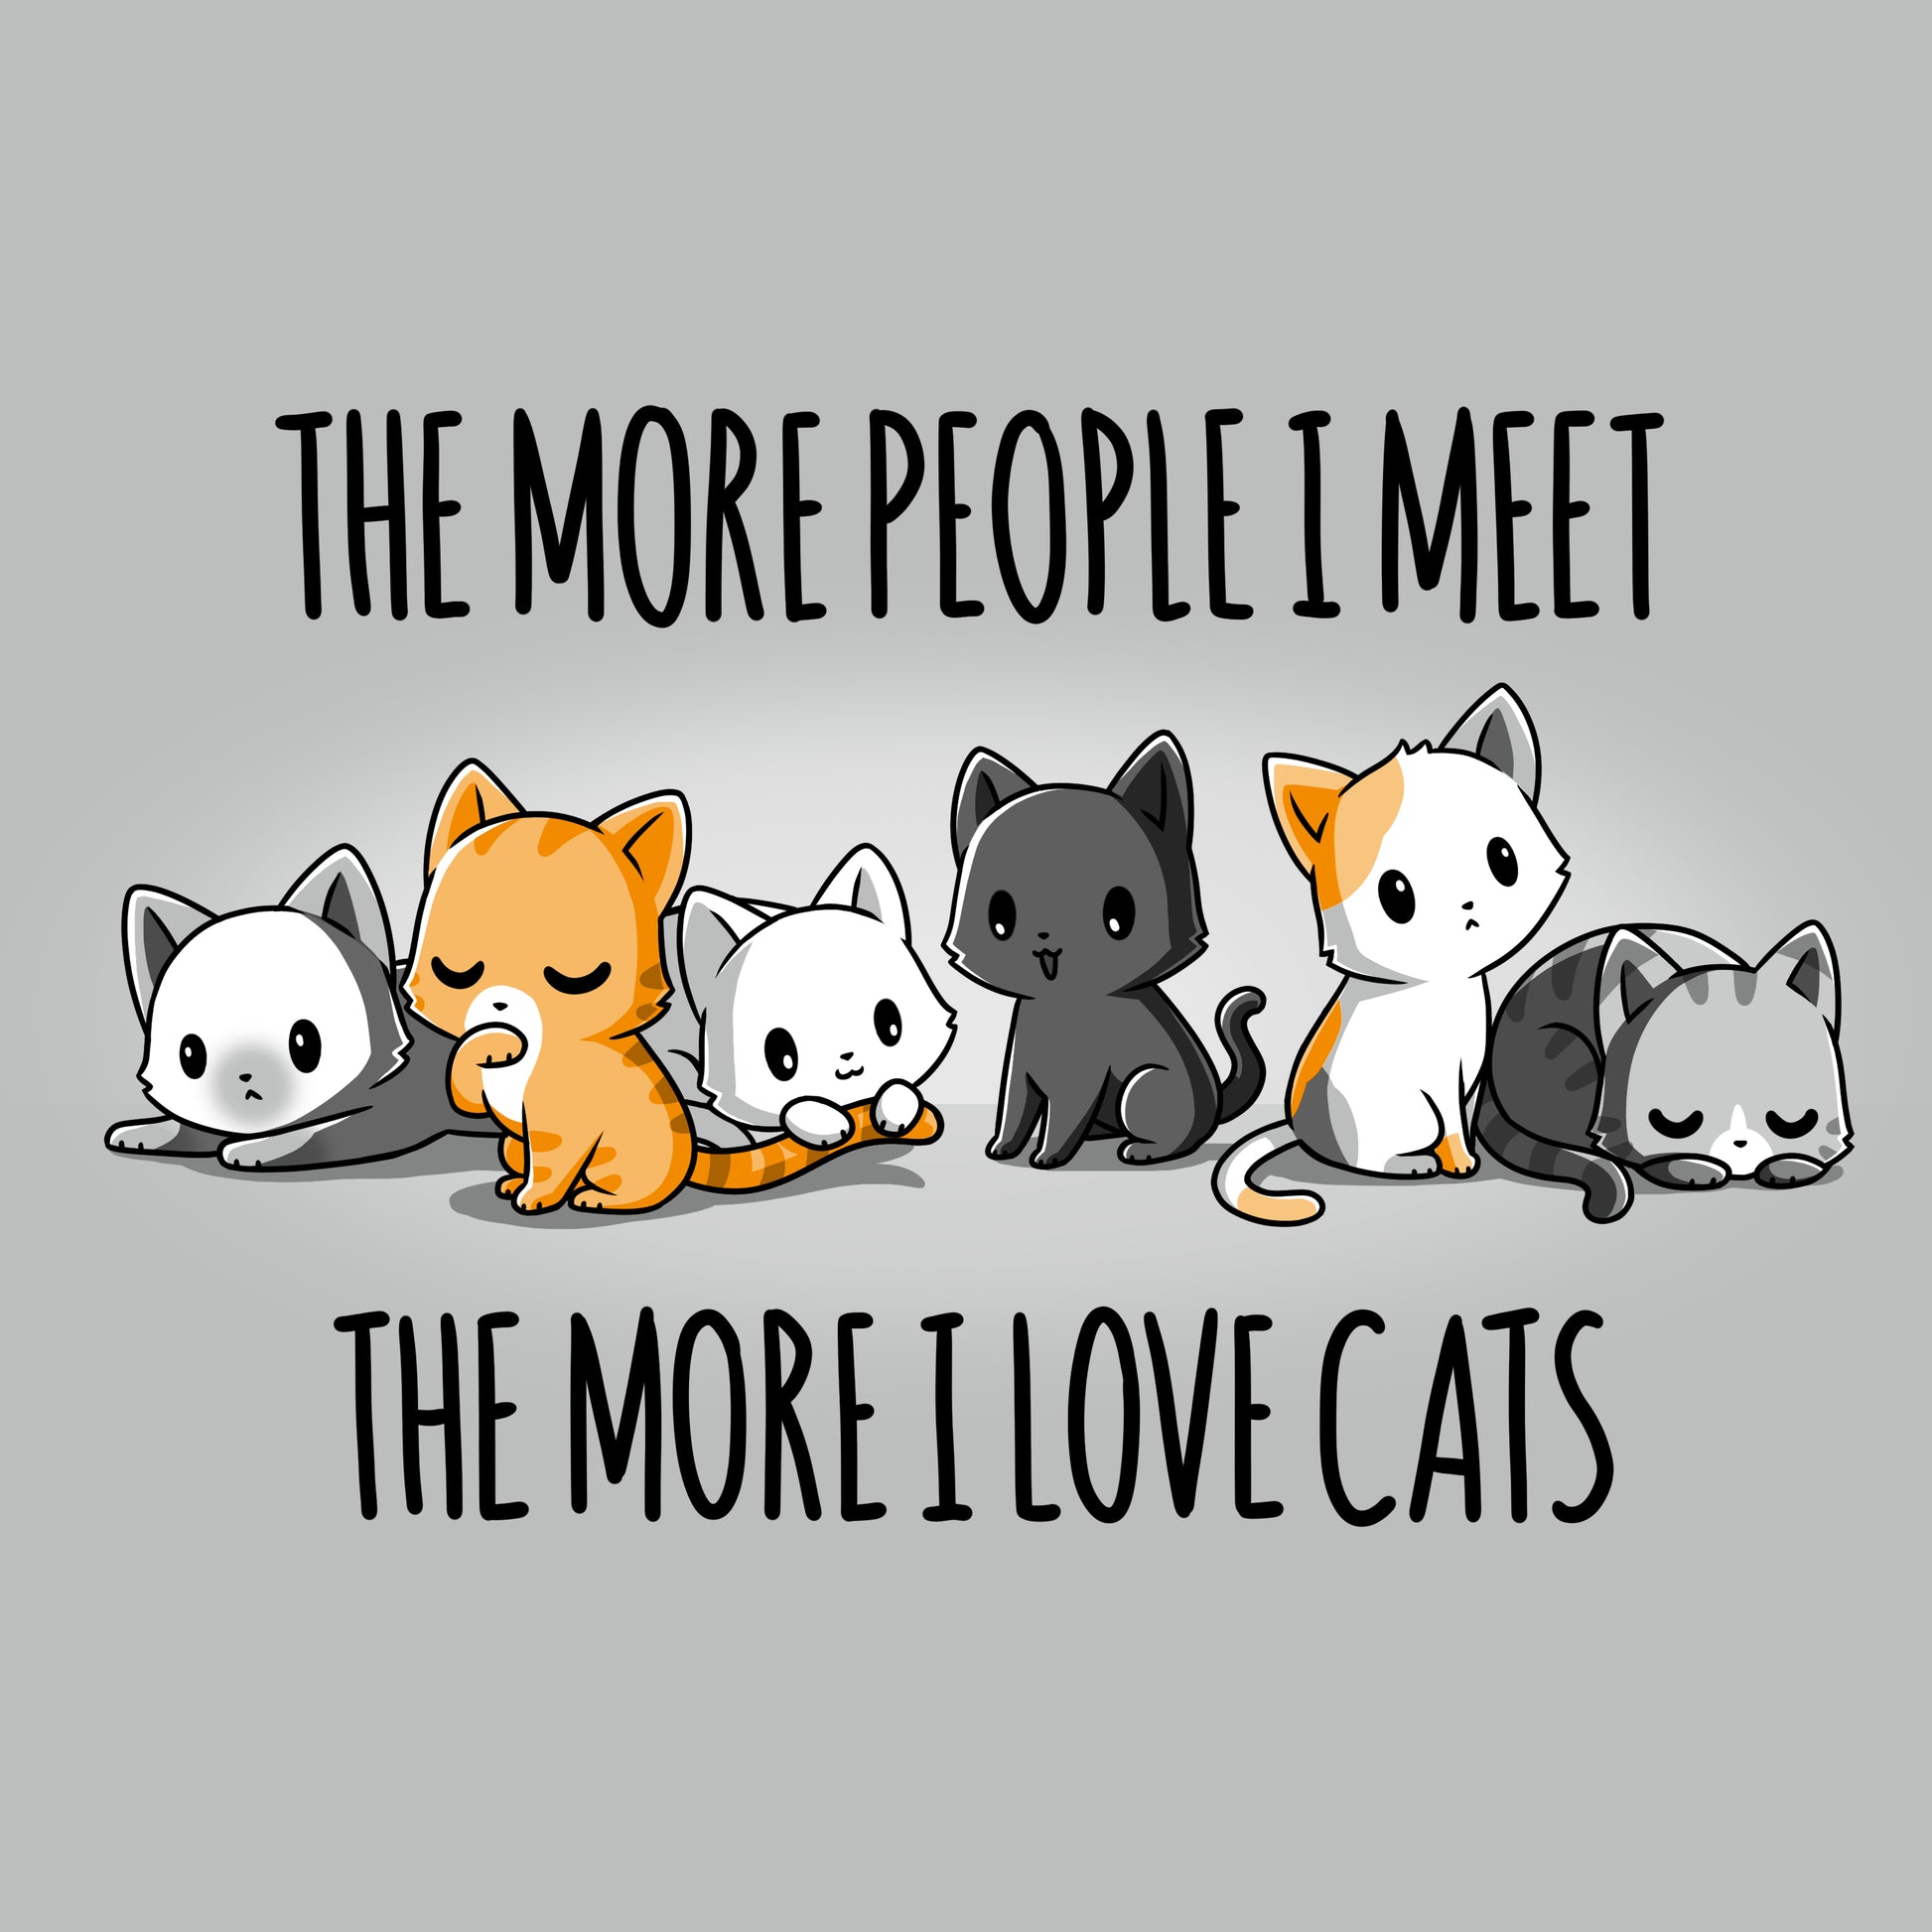 The more people meet, the more I love TeeTurtle's "I Love Cats" product as a cat lover.